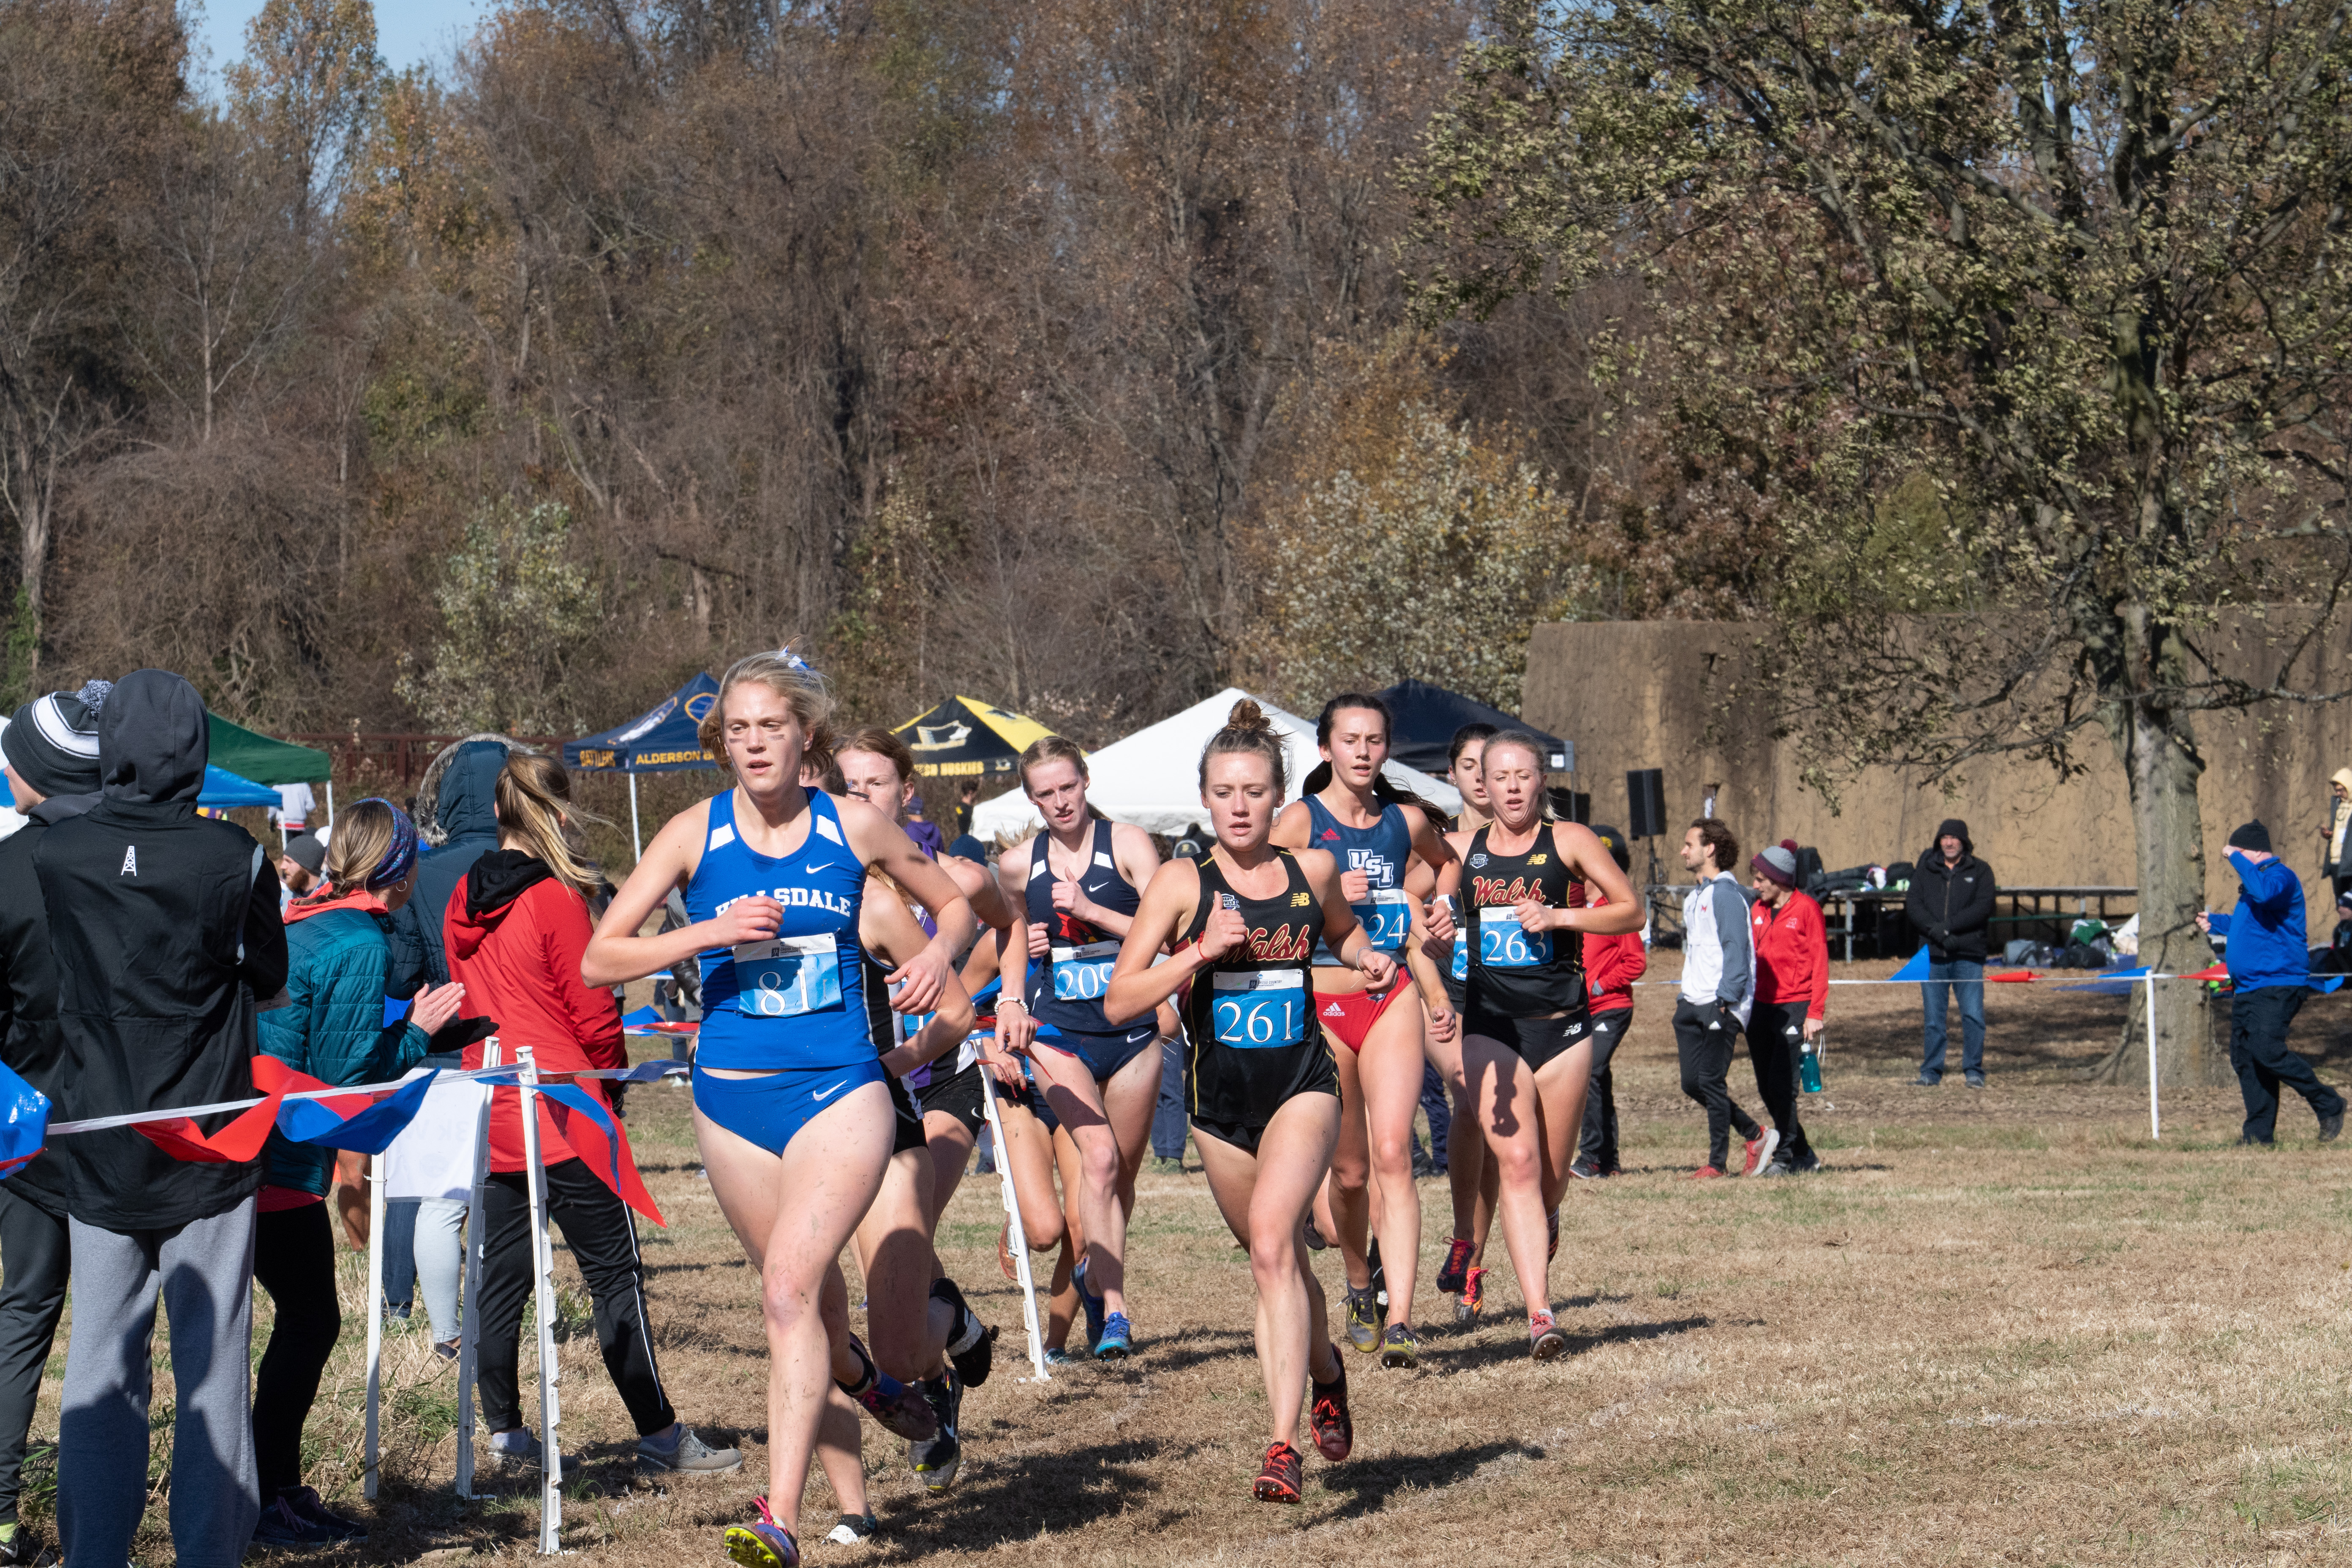 Chargers qualify for national meet for seventh straight year